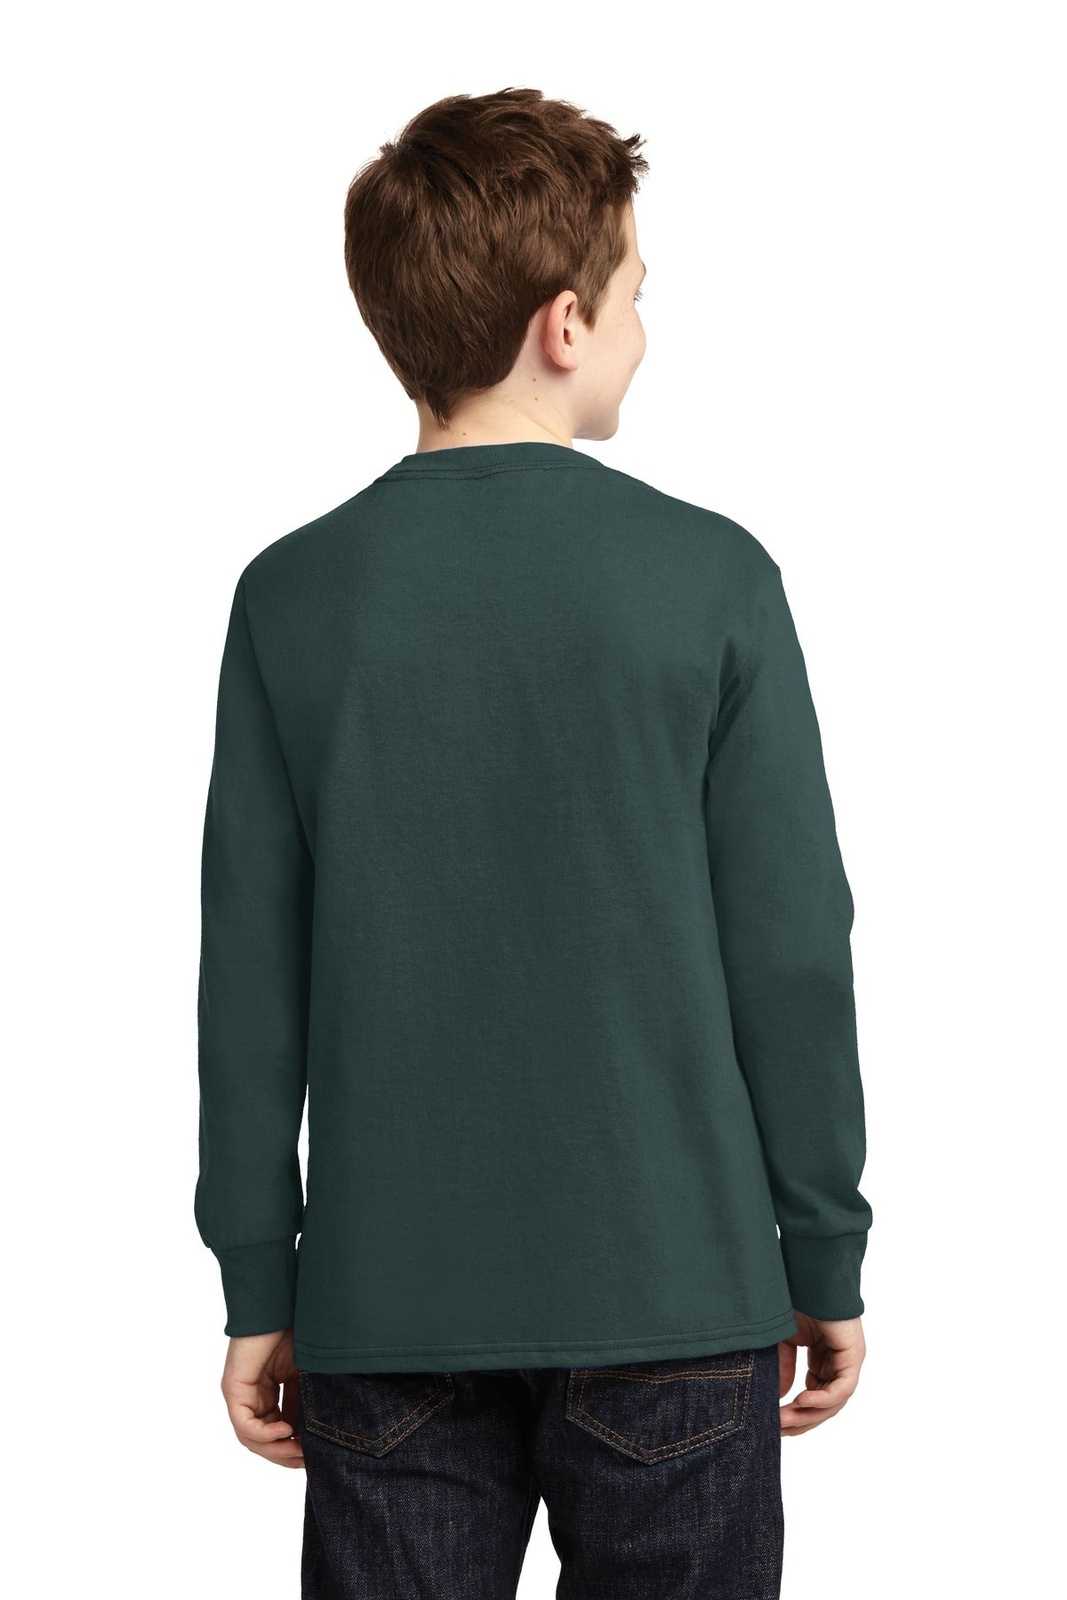 Port & Company PC54YLS Youth Long Sleeve Core Cotton Tee - Dark Green - HIT a Double - 1